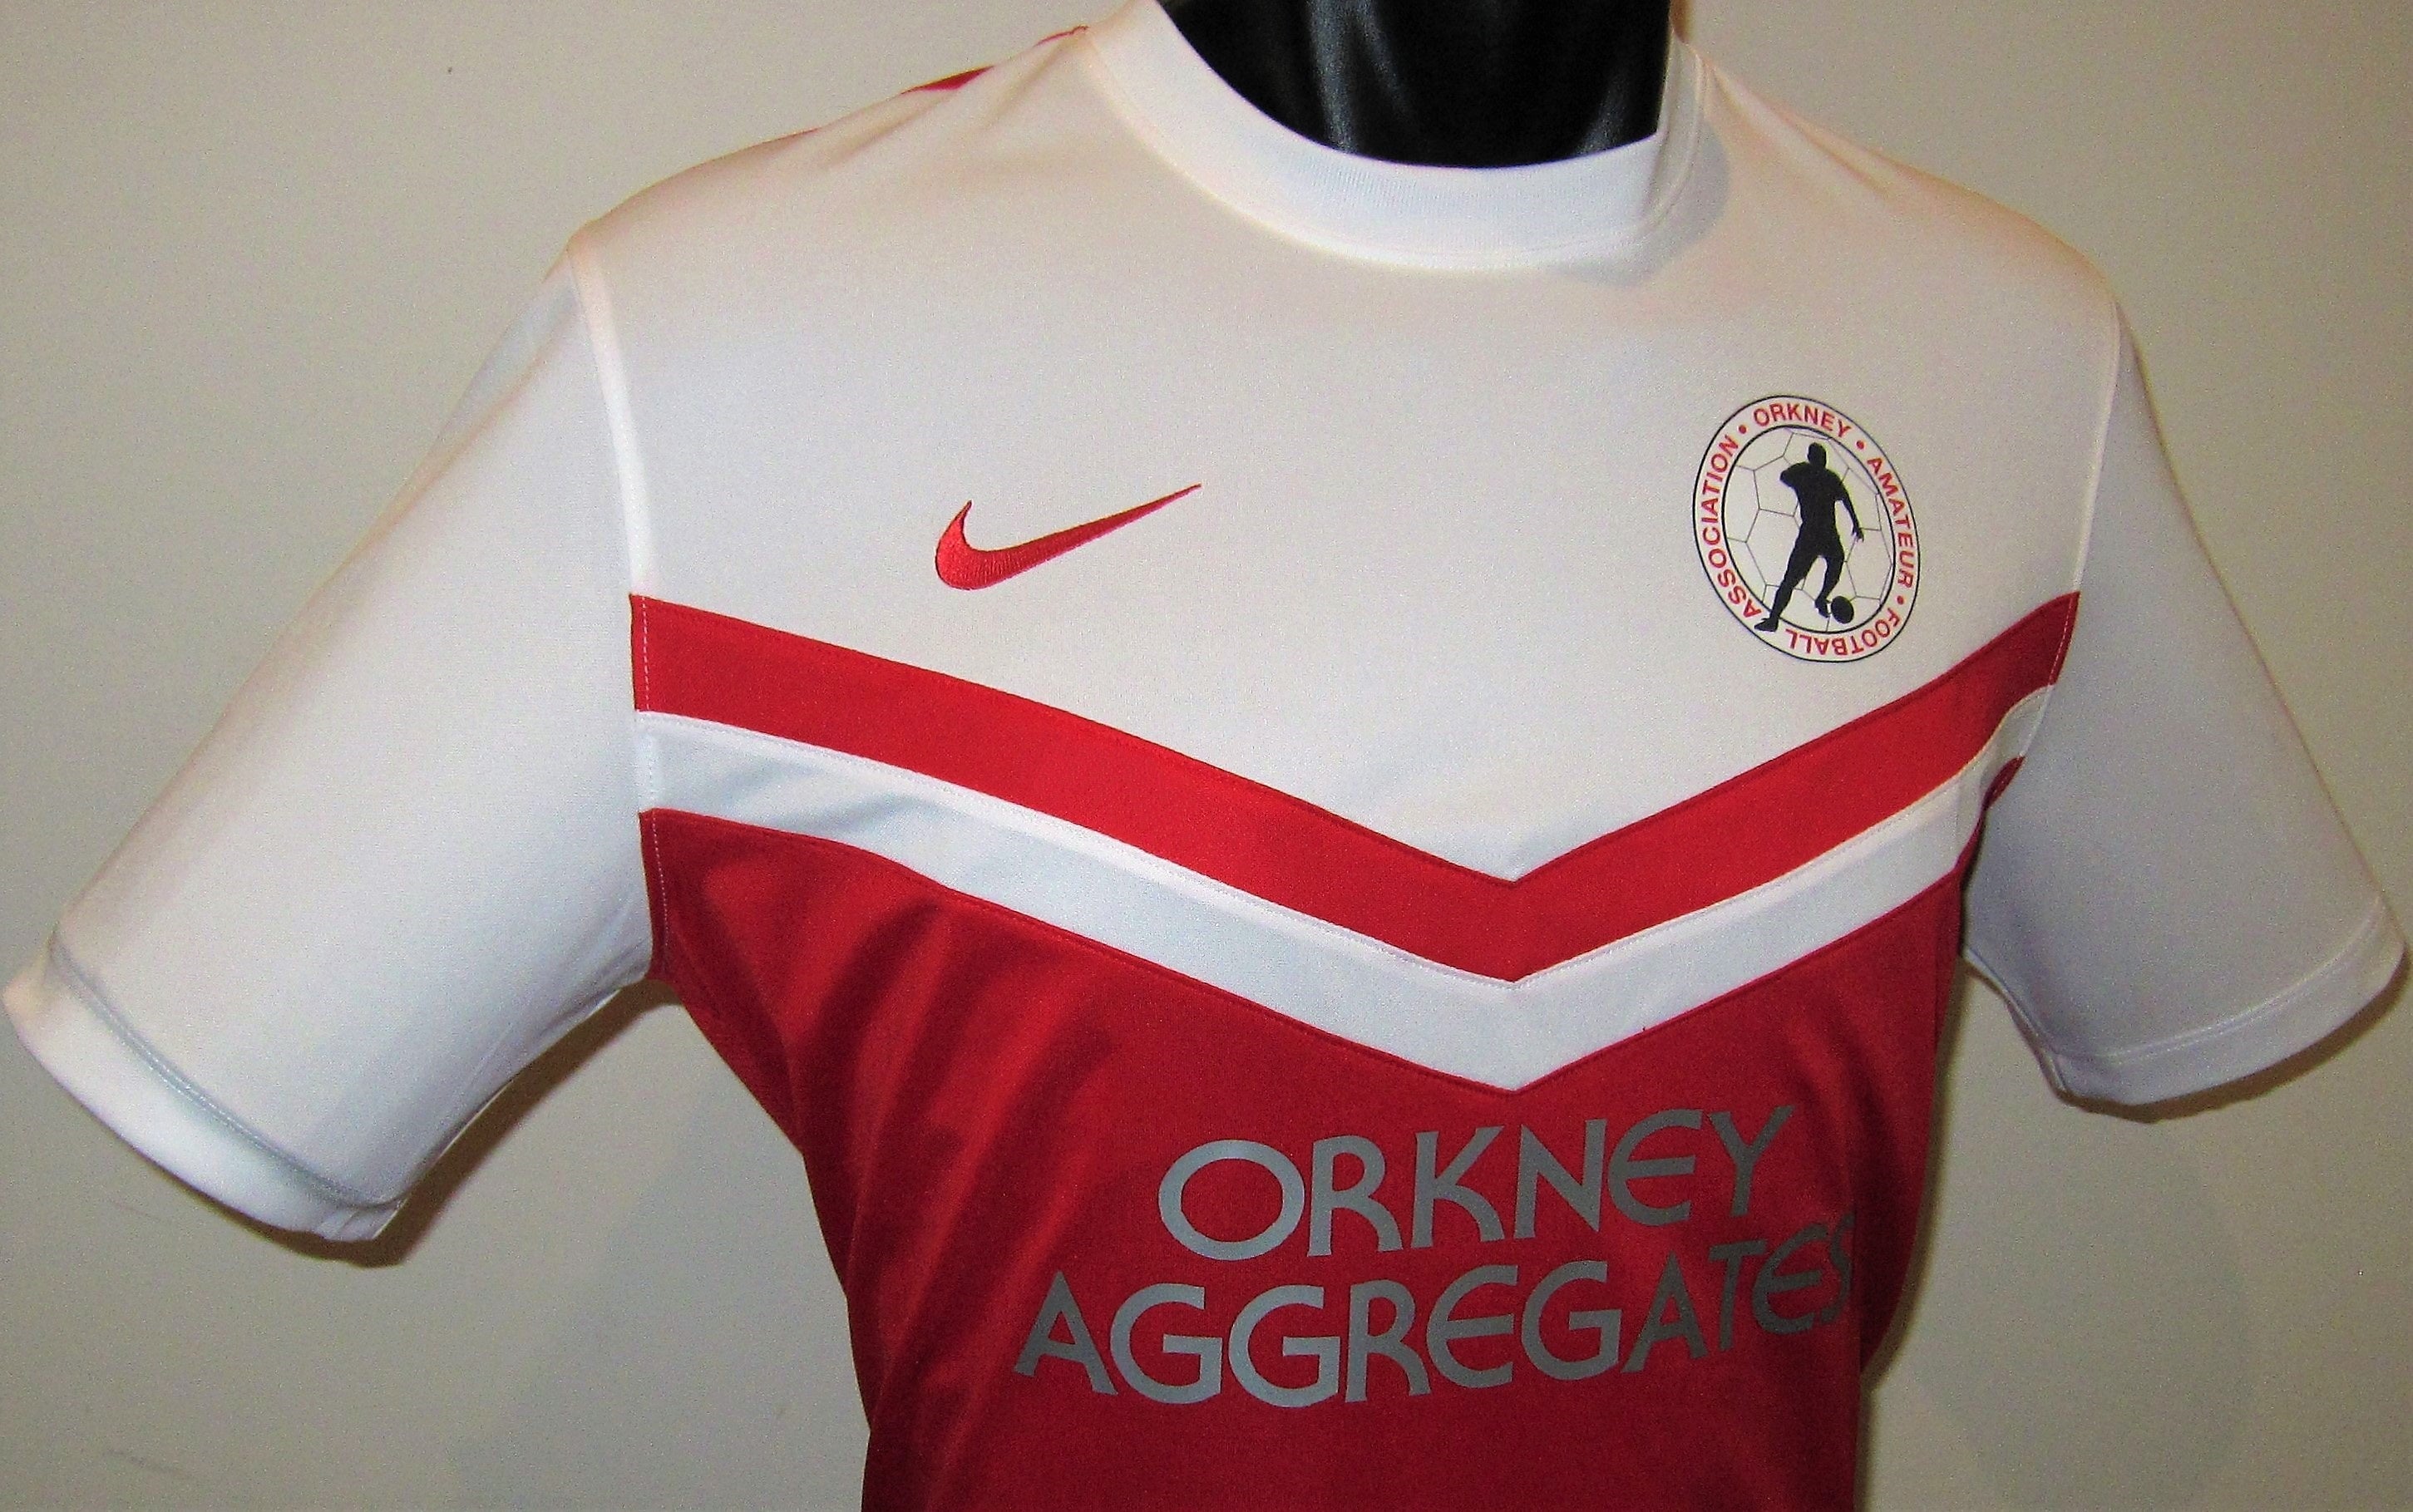 Orkney 2017-18 Home (#9) Jersey/Shirt